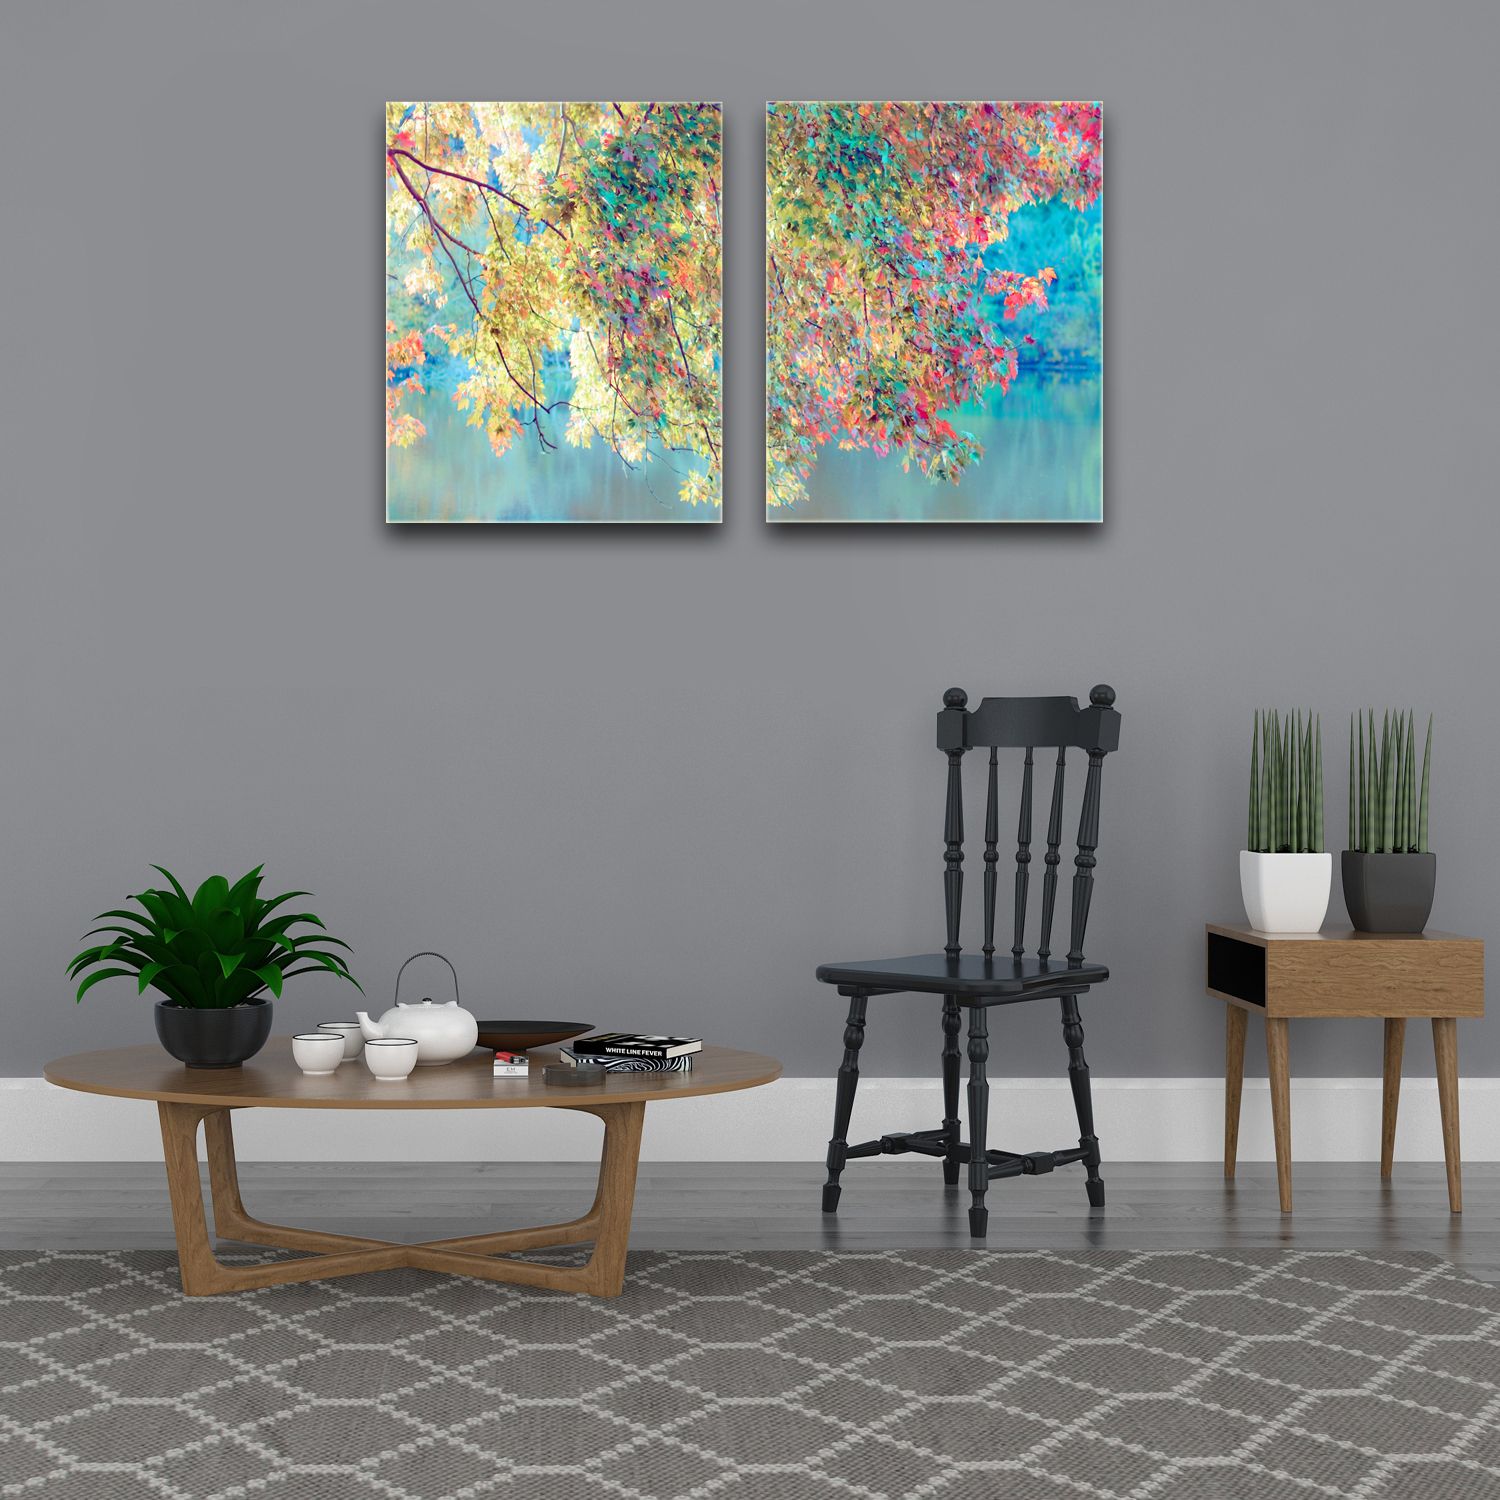 2 Panels 40x50cm Modern Home Office Wall Art Canvas Throughout Most Current Natural Framed Art Prints (View 13 of 20)